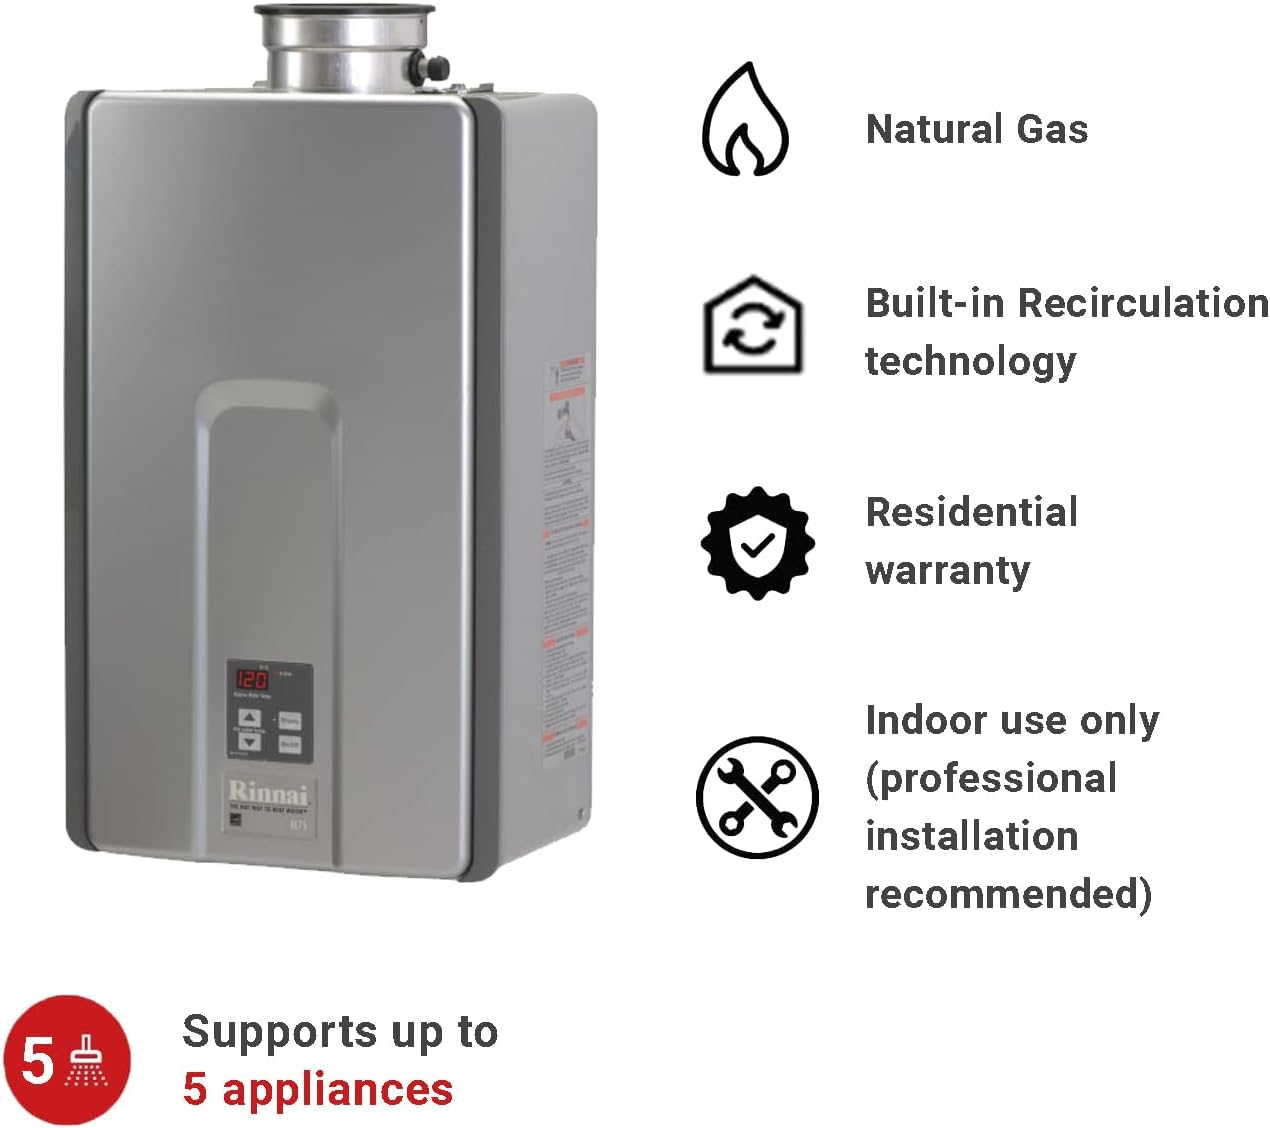 Rinnai RL94IN Tankless Hot Water Heater, 9.8 GPM, Natural Gas, Indoor Installation - Rinnai RL94IN Tankless Hot Water Heater Review